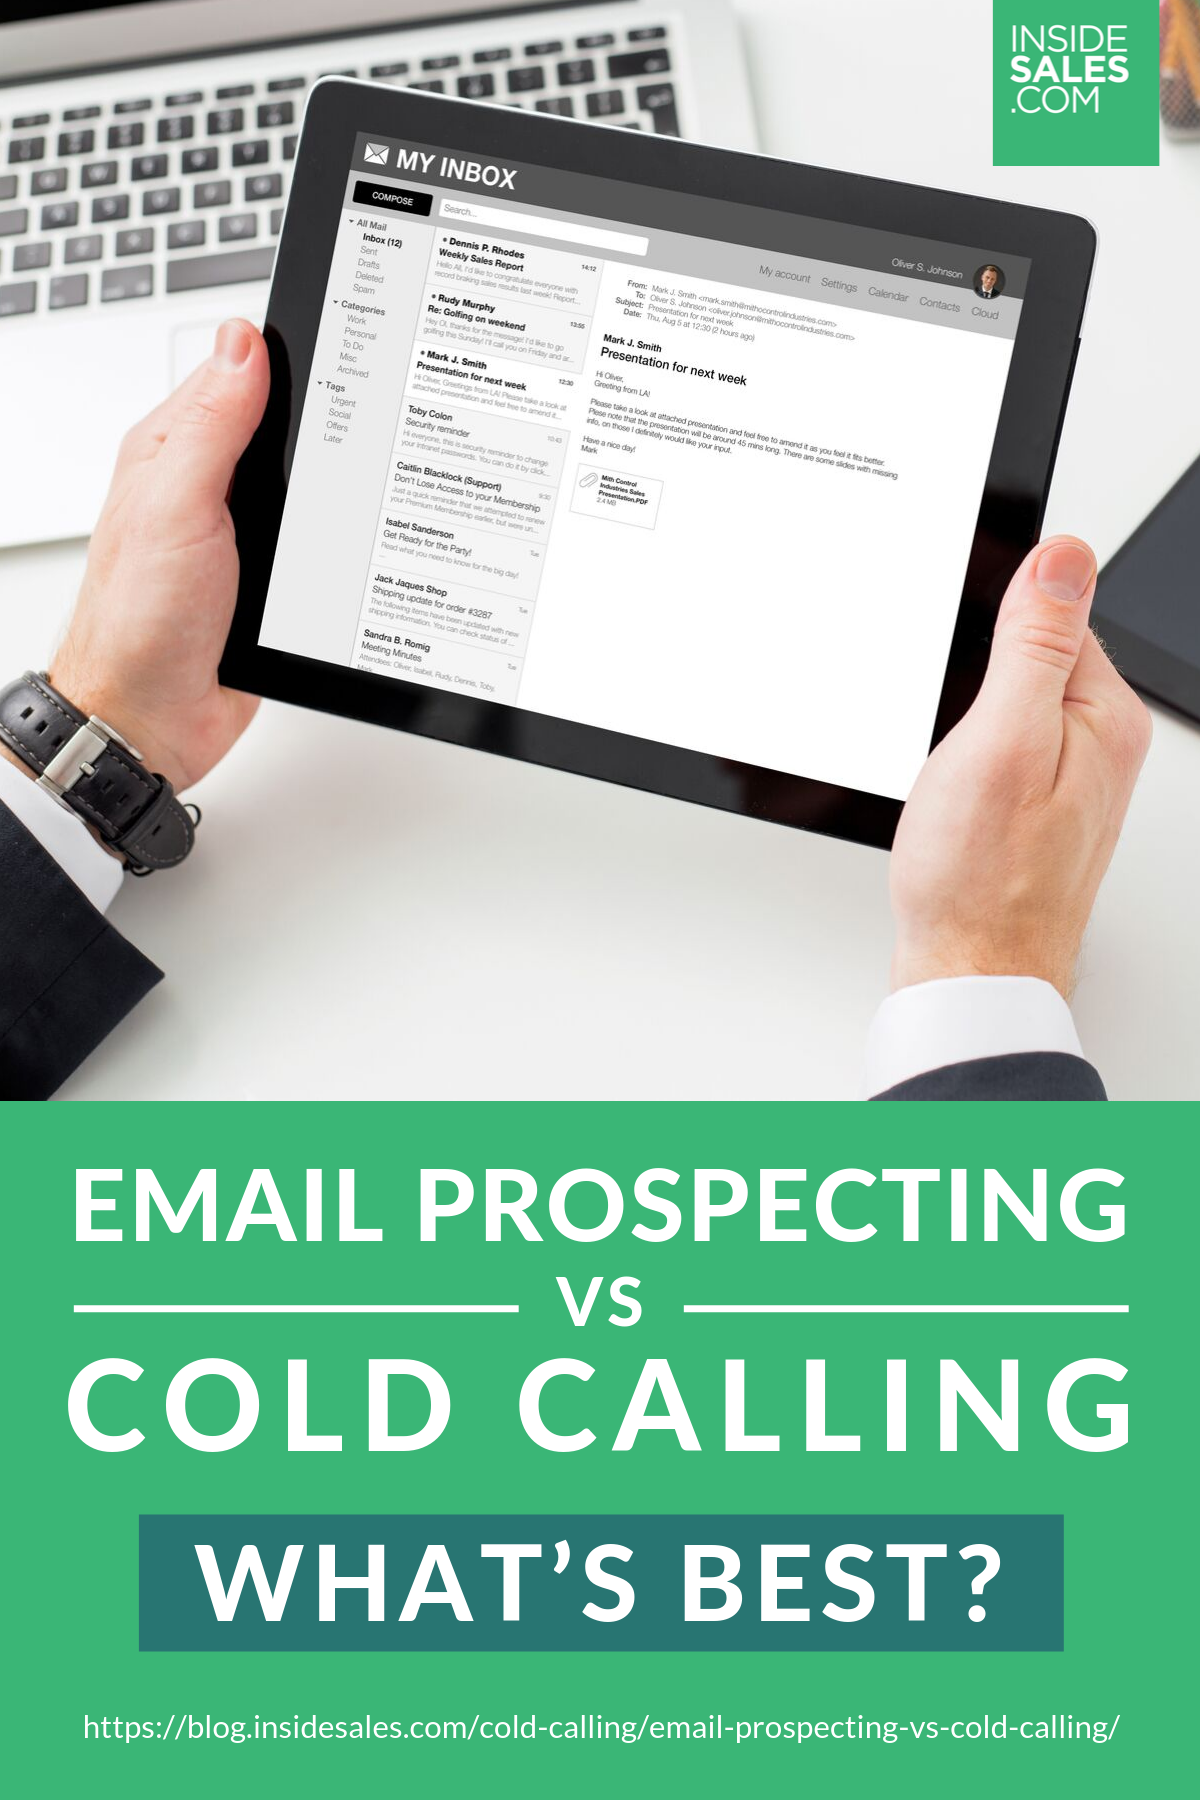 Email Prospecting vs Cold Calling: What’s Best? https://resources.insidesales.com/blog/cold-calling/email-prospecting-vs-cold-calling/